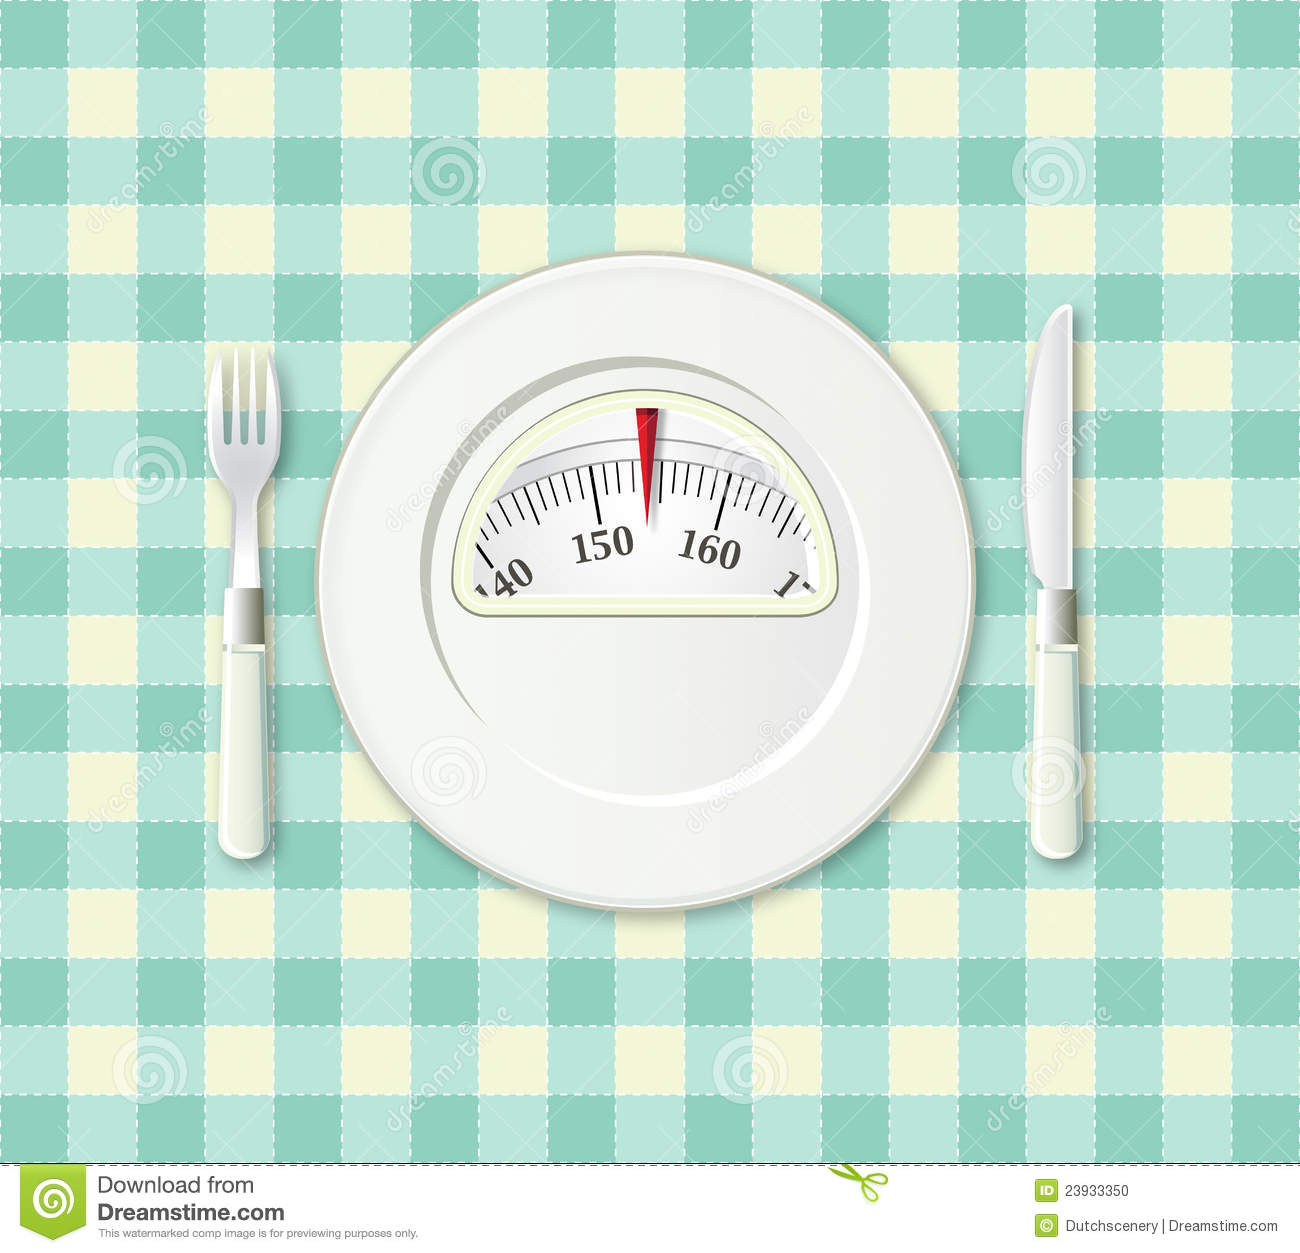 Plate With A Weight Balance Scale  Diet Concept  Stock Photo   Image